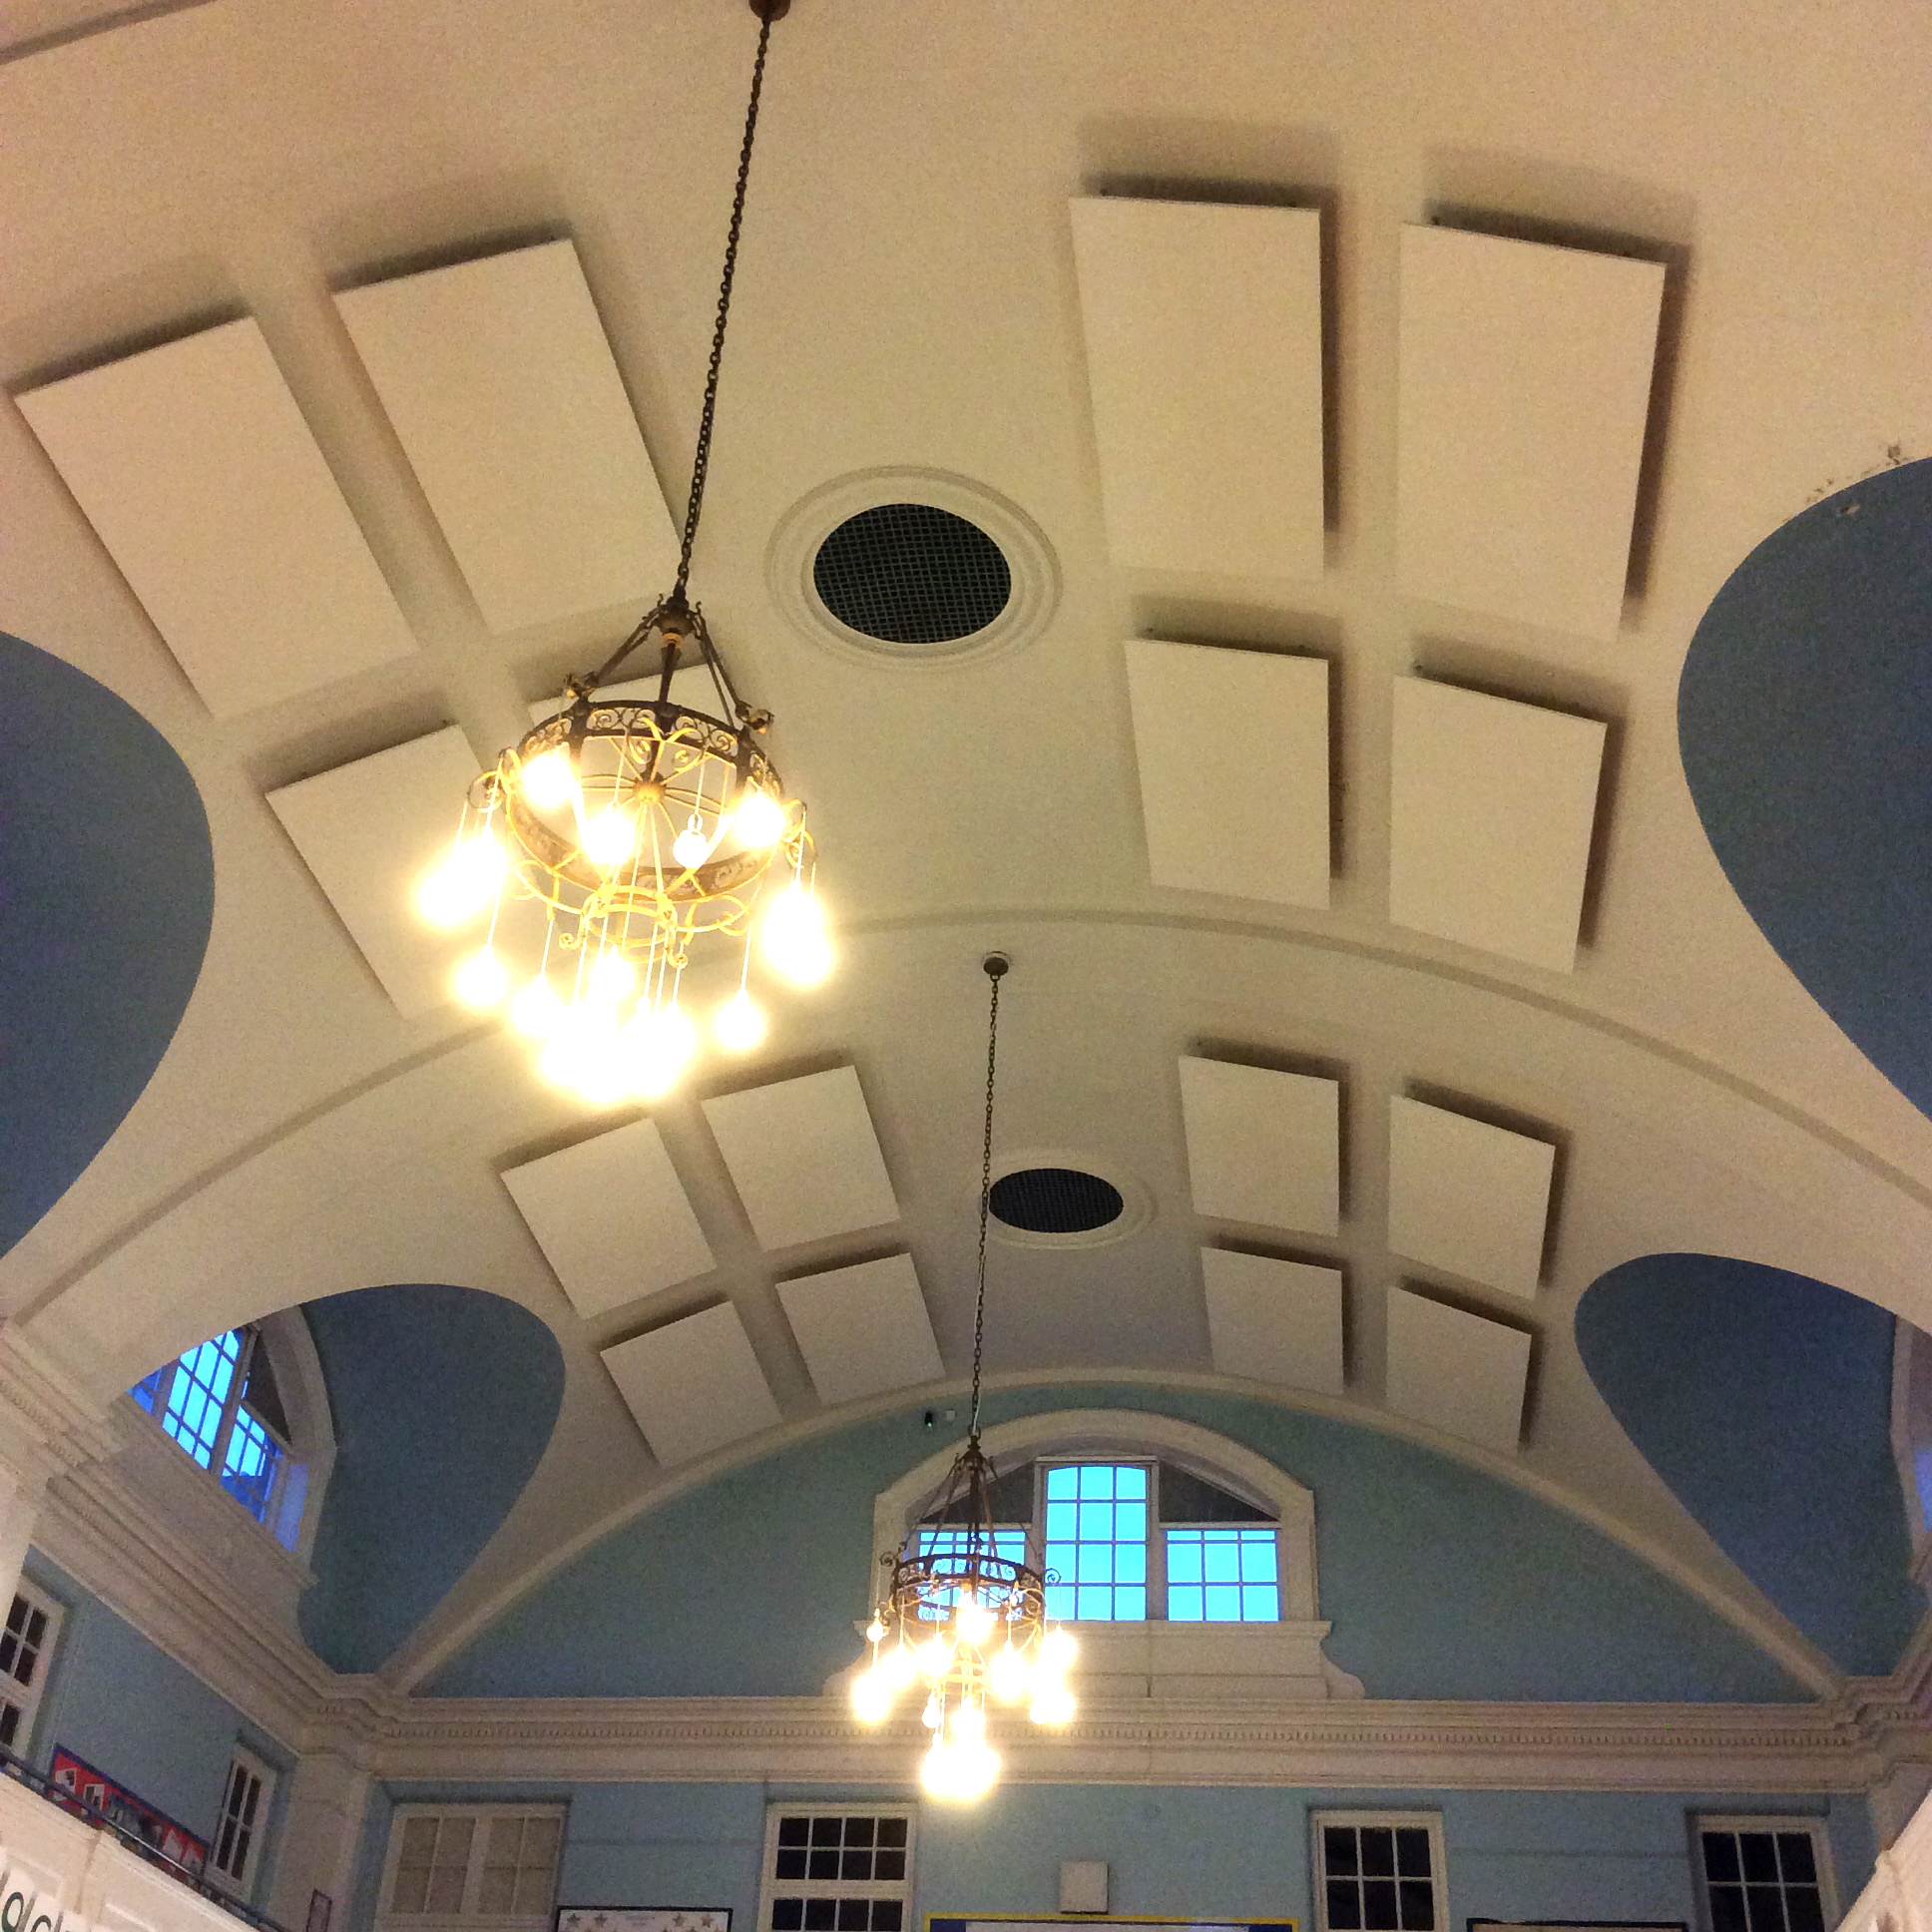 village hall acoustic panels installed